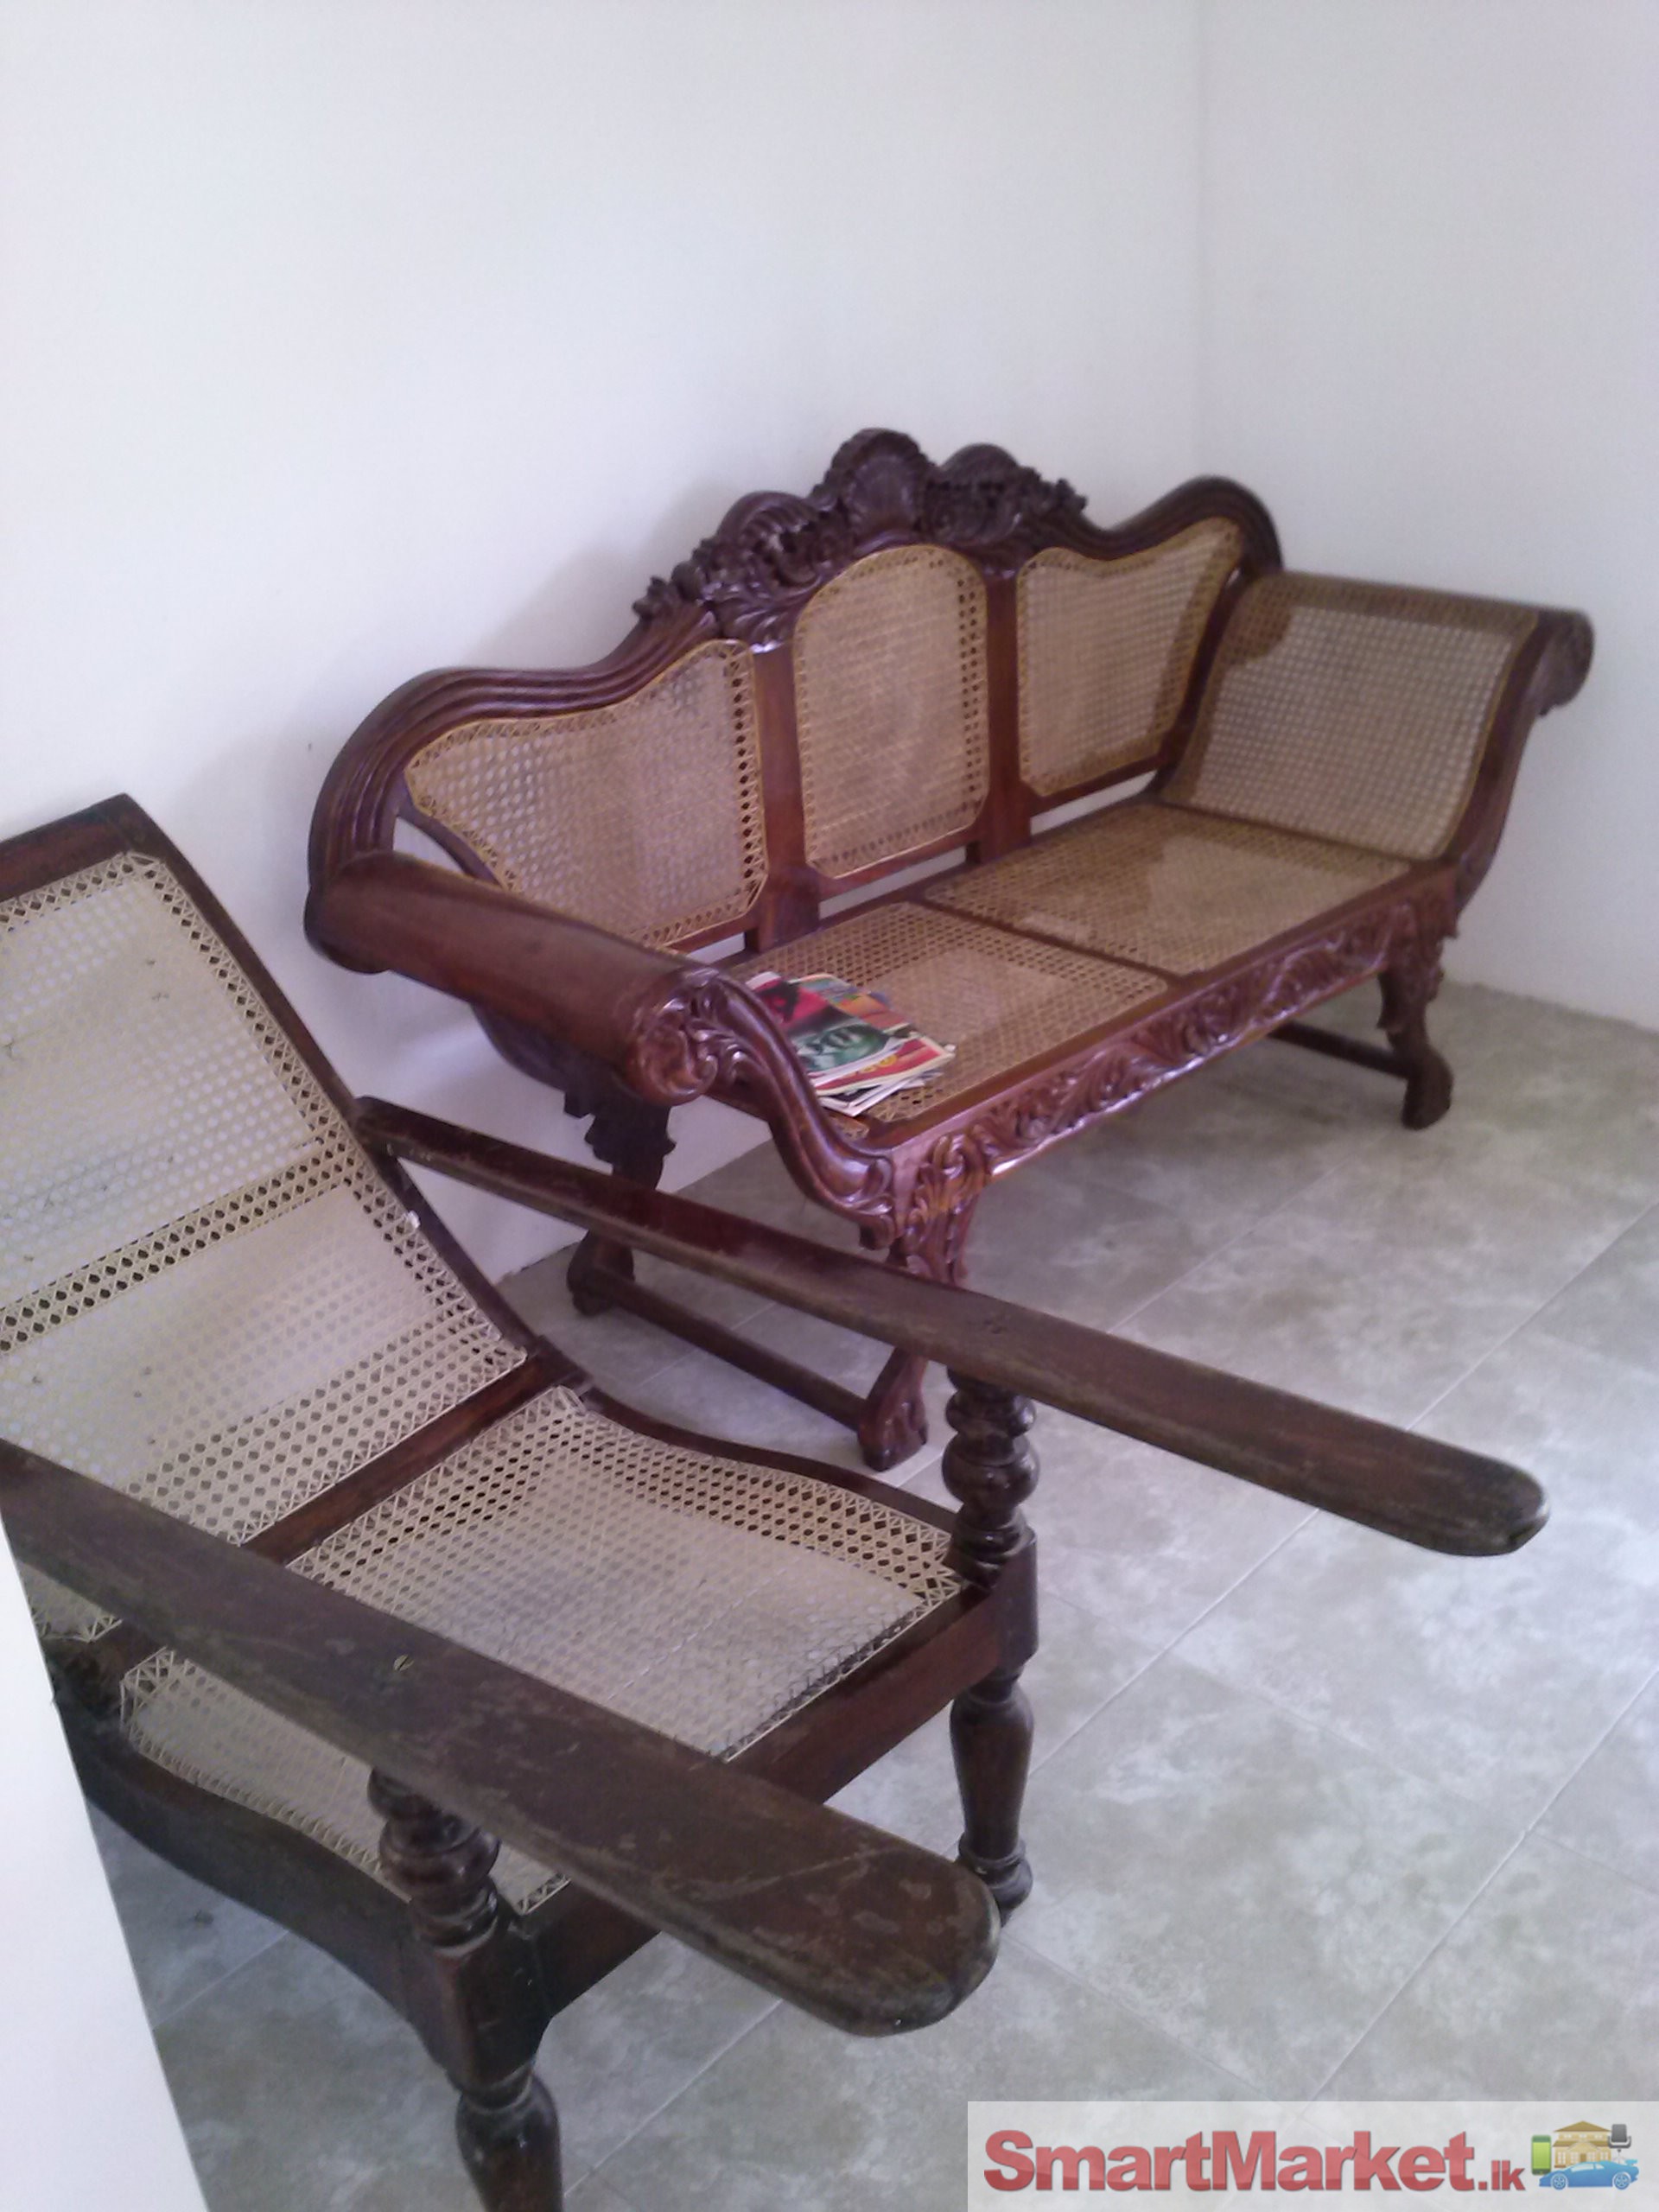 Furniture for sale lowest prices